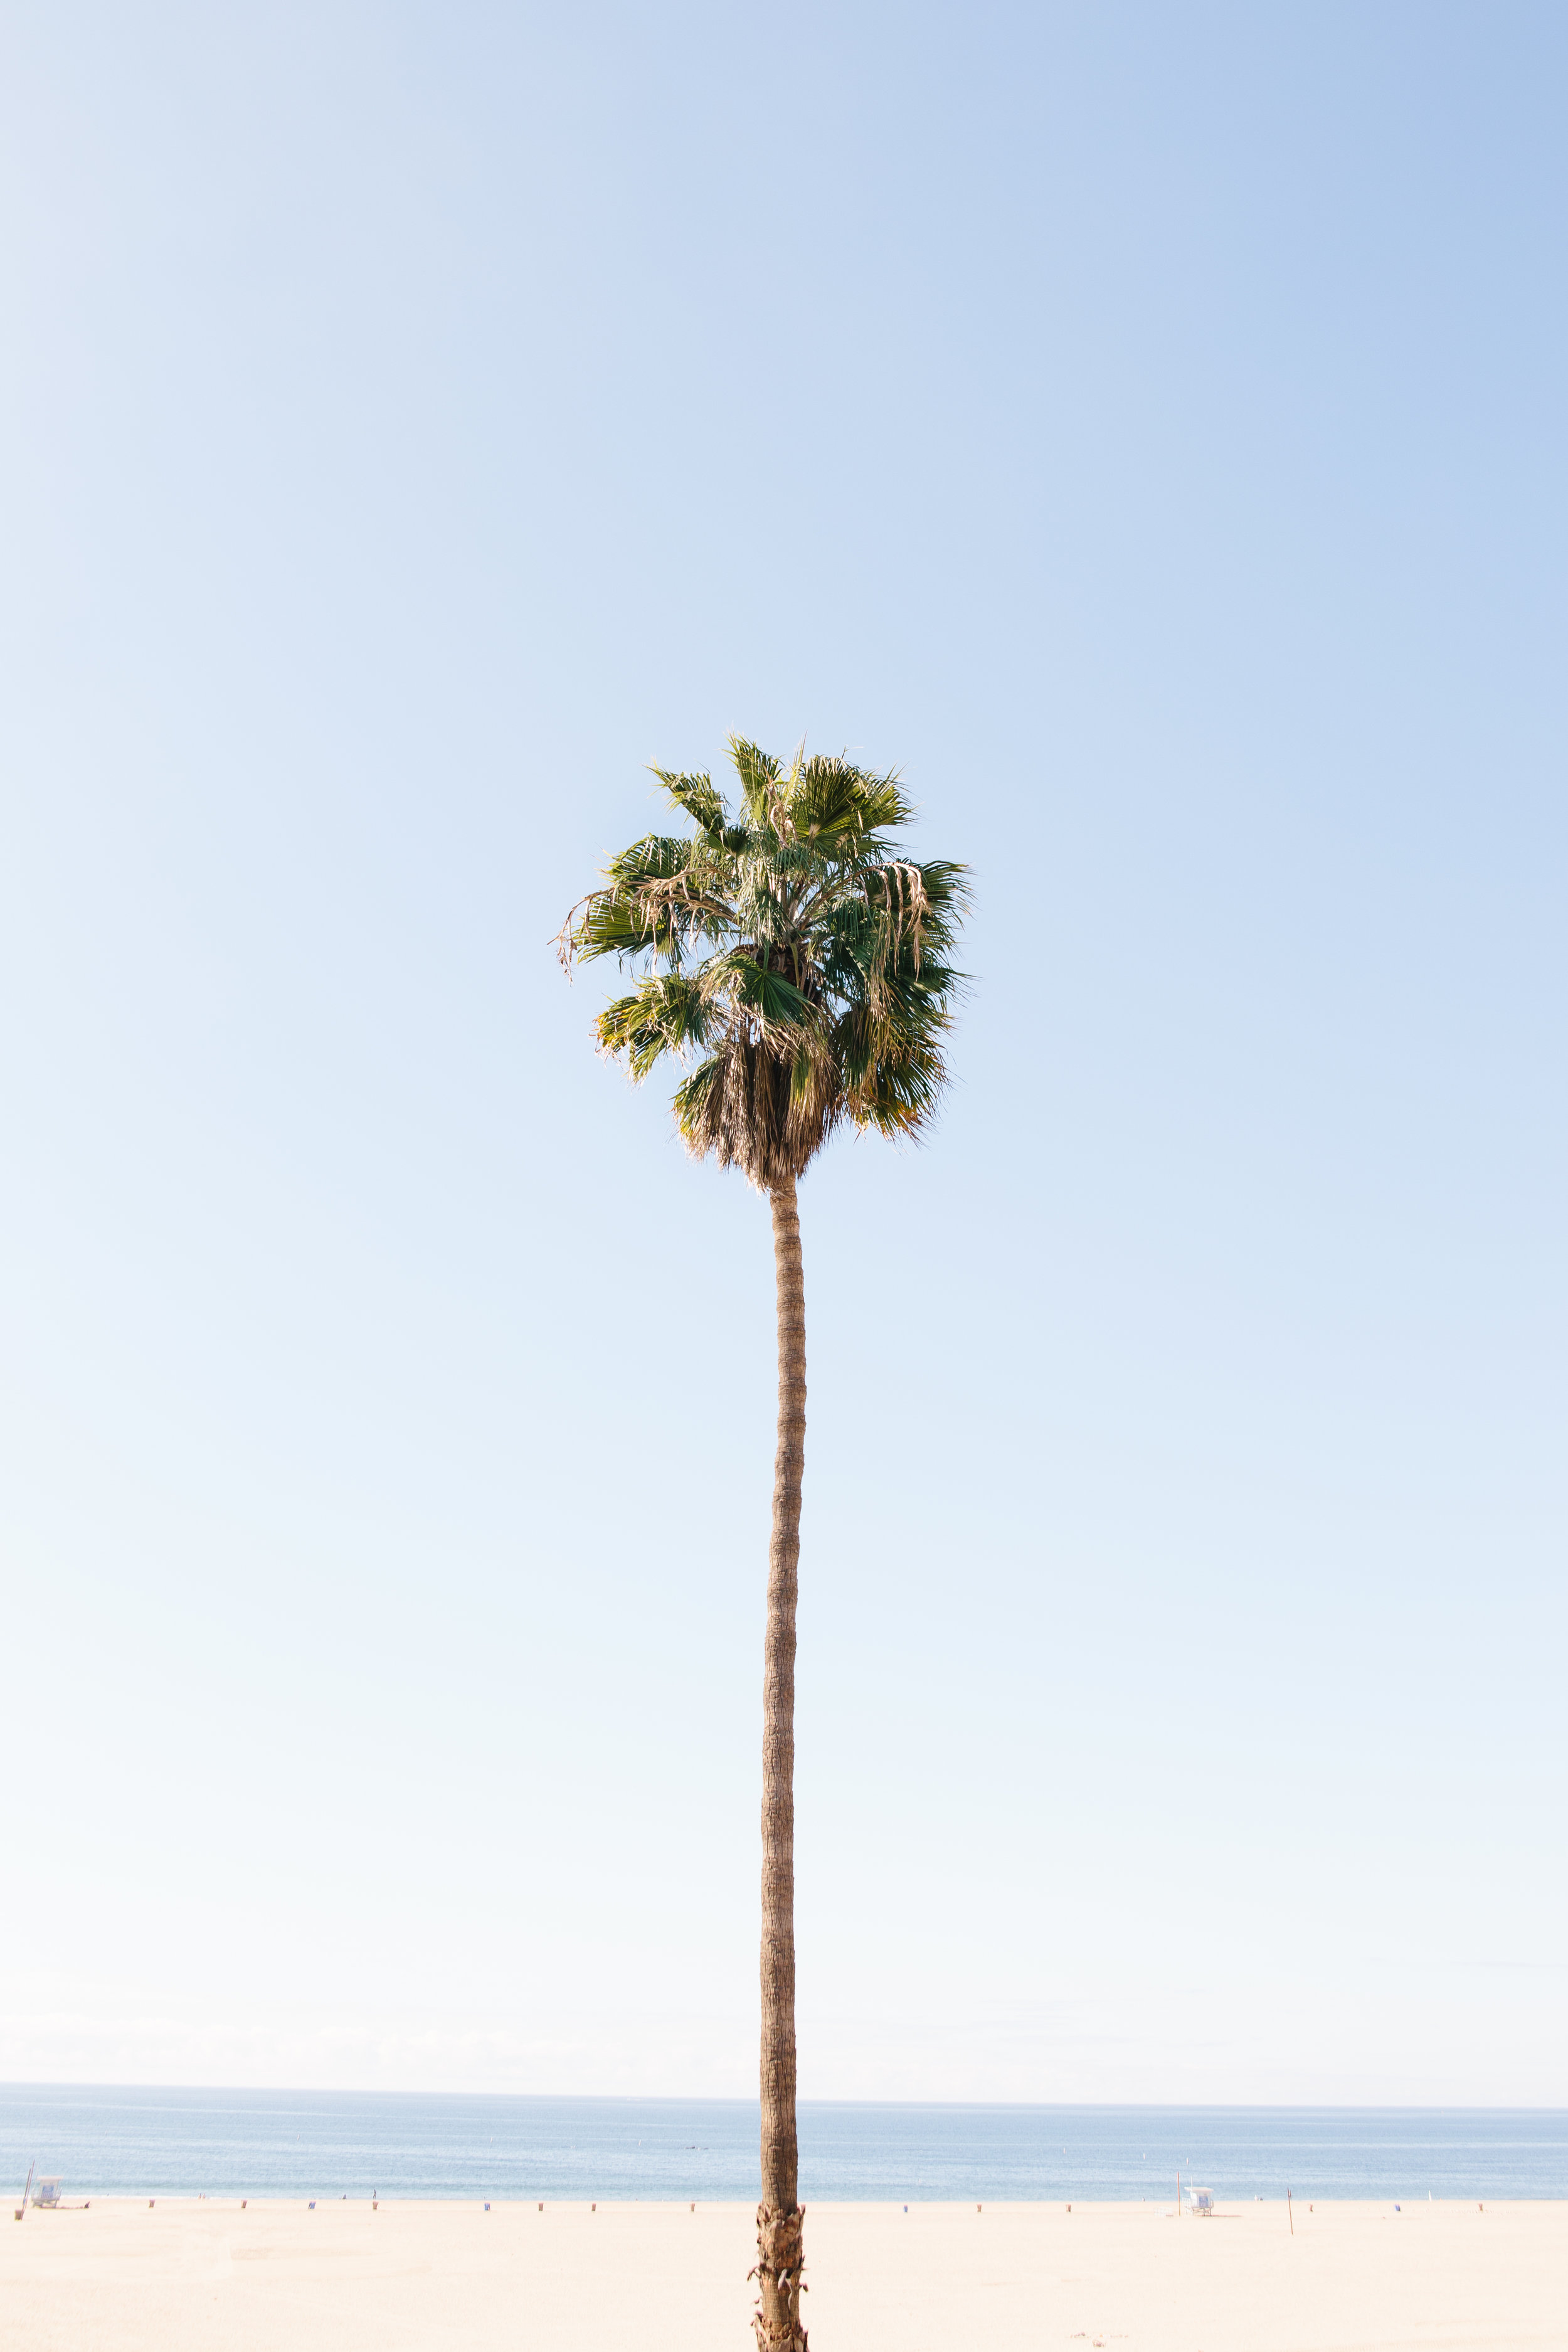 The Lone Palm